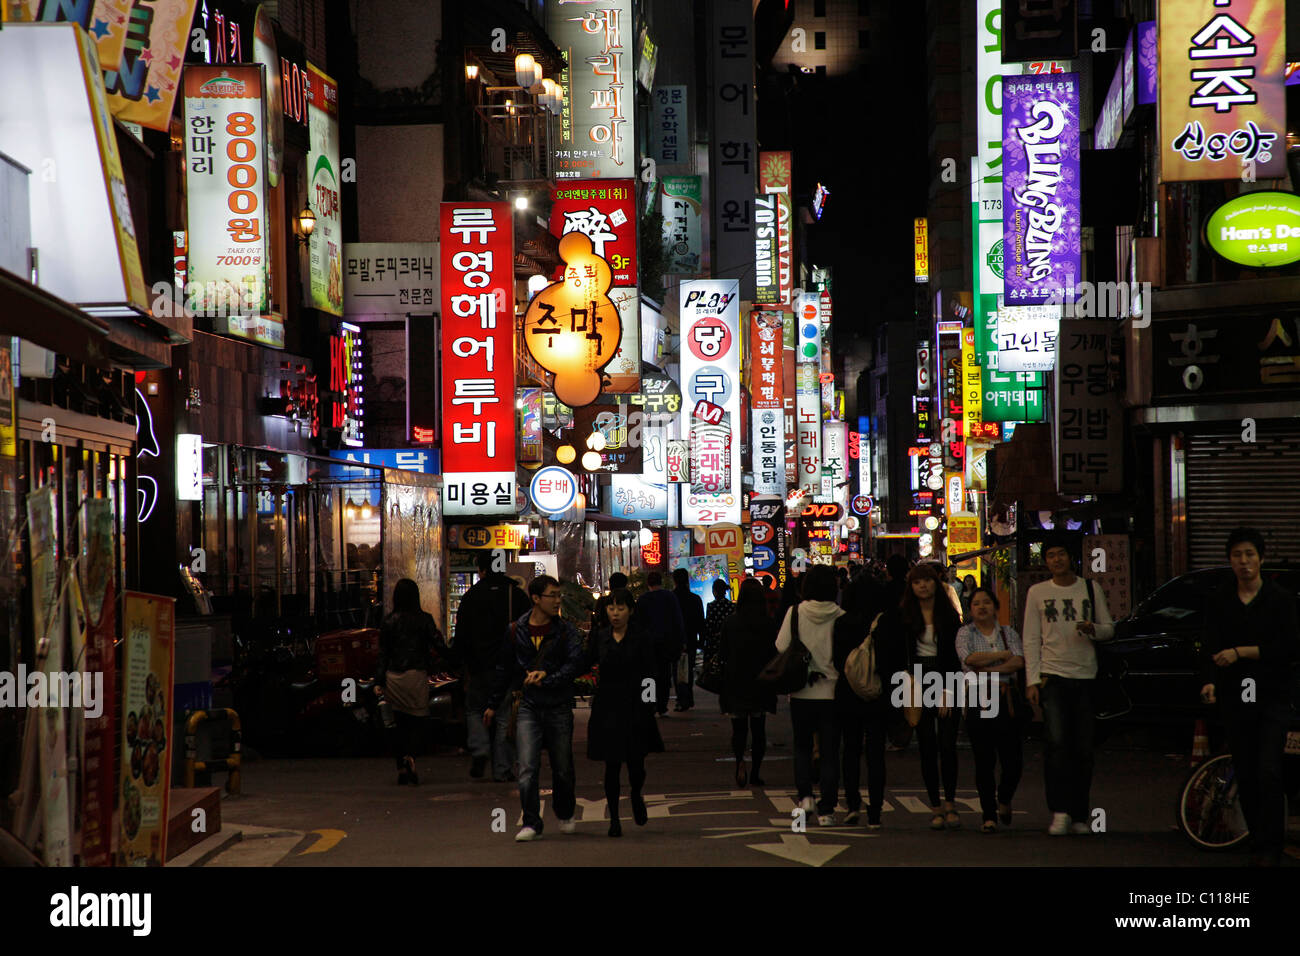 Young Koreans during an evening stroll in the entertainment district of Seoul, South Korea, Asia Stock Photo